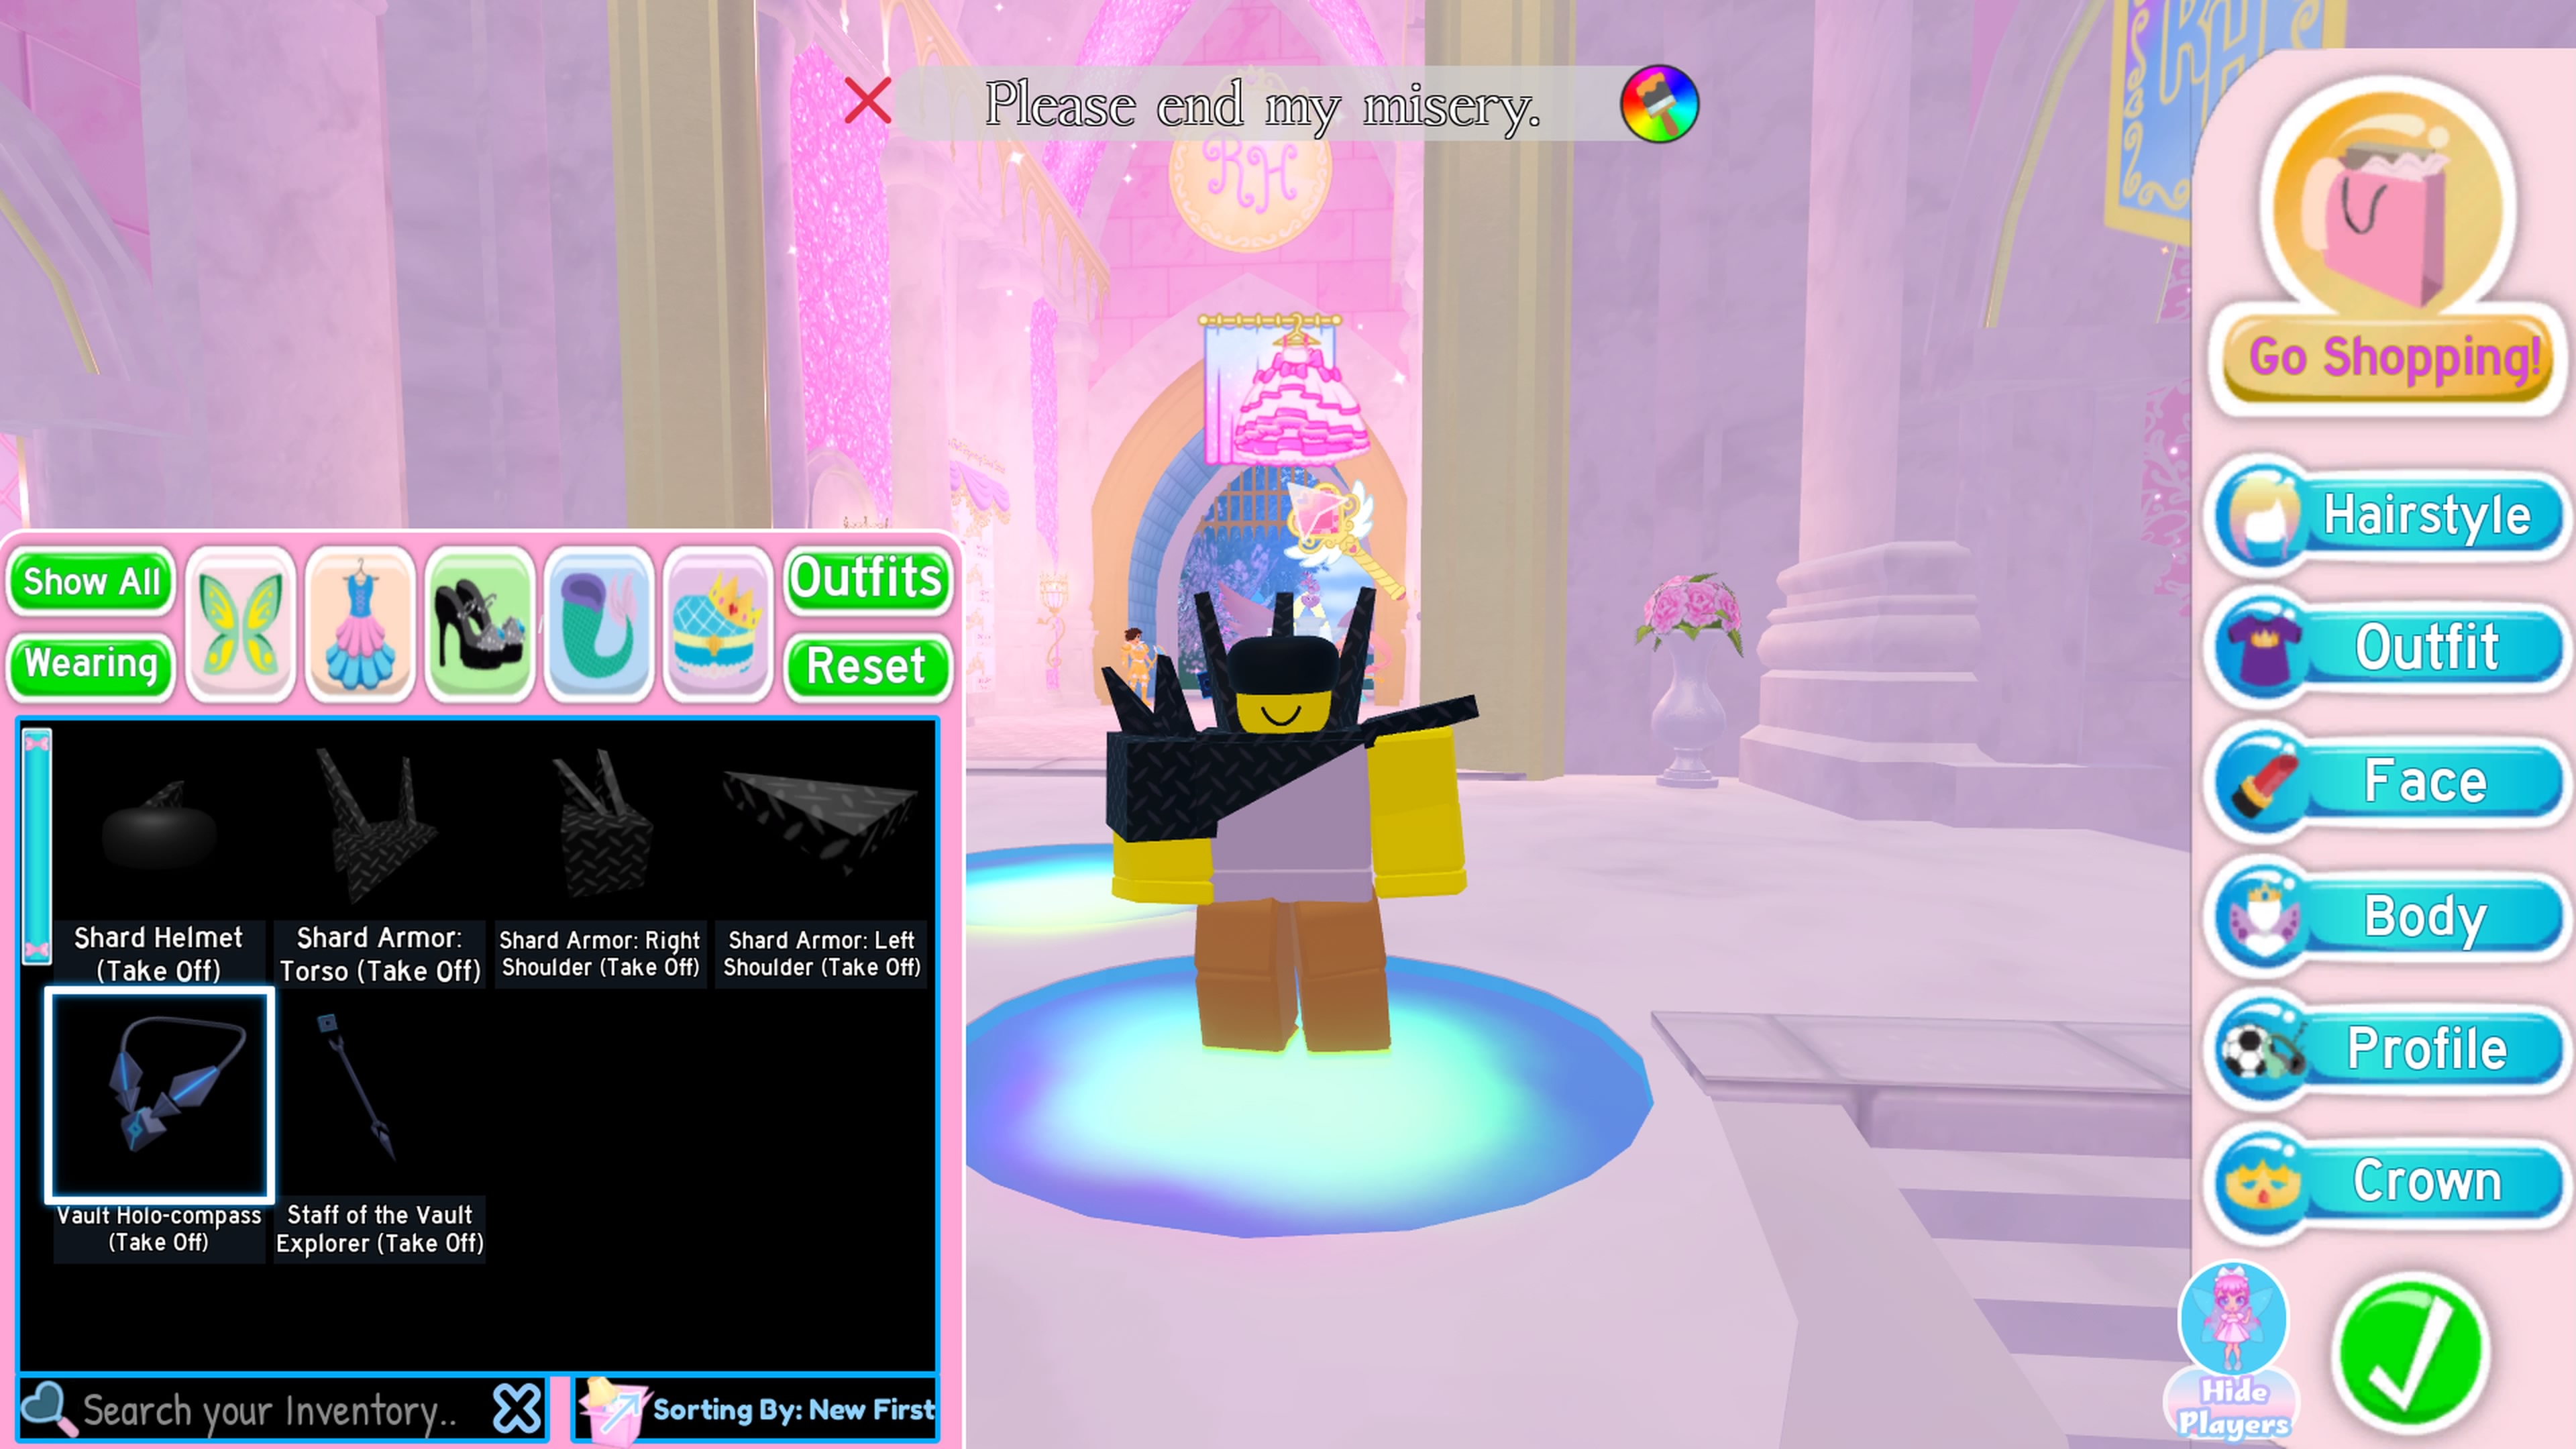 Shard avatar (different back item, a staff with the roblox cube) in the Royale High Avatar editor. Outfit name is 'Please end my misery.'